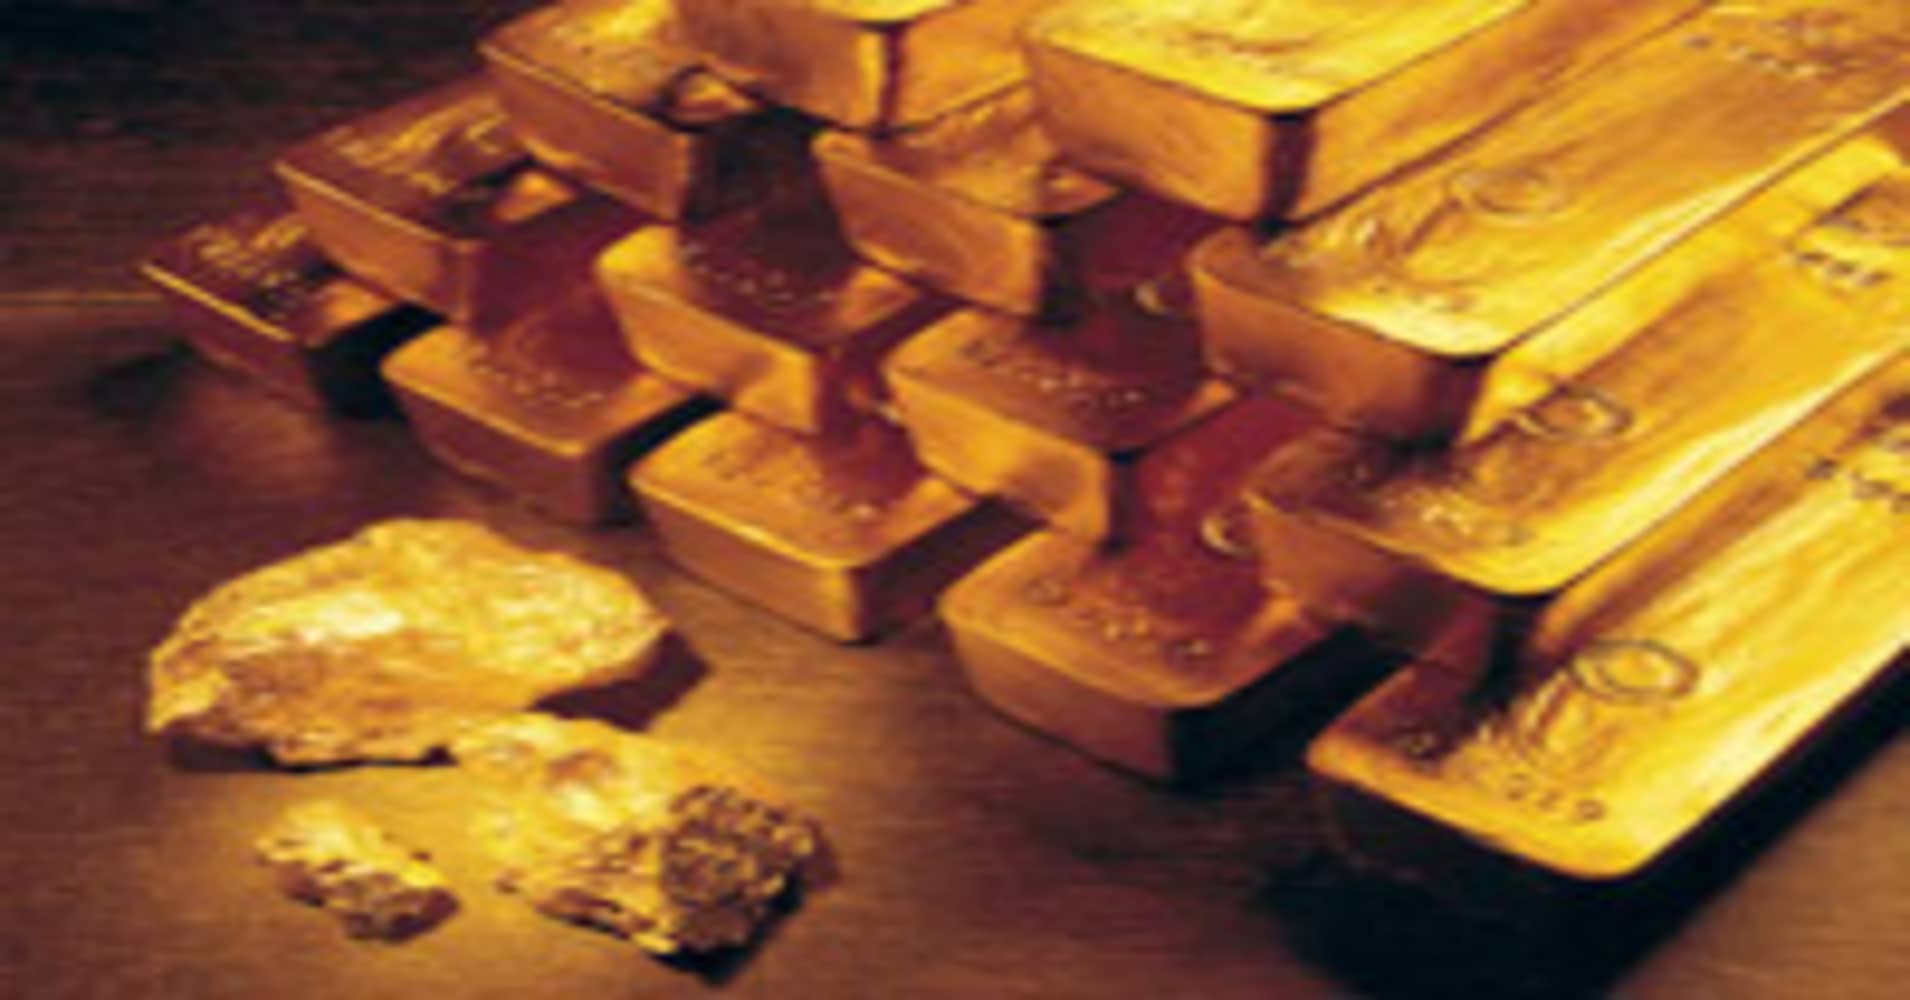 Want Free Gold? Maybe You Should Visit Switzerland